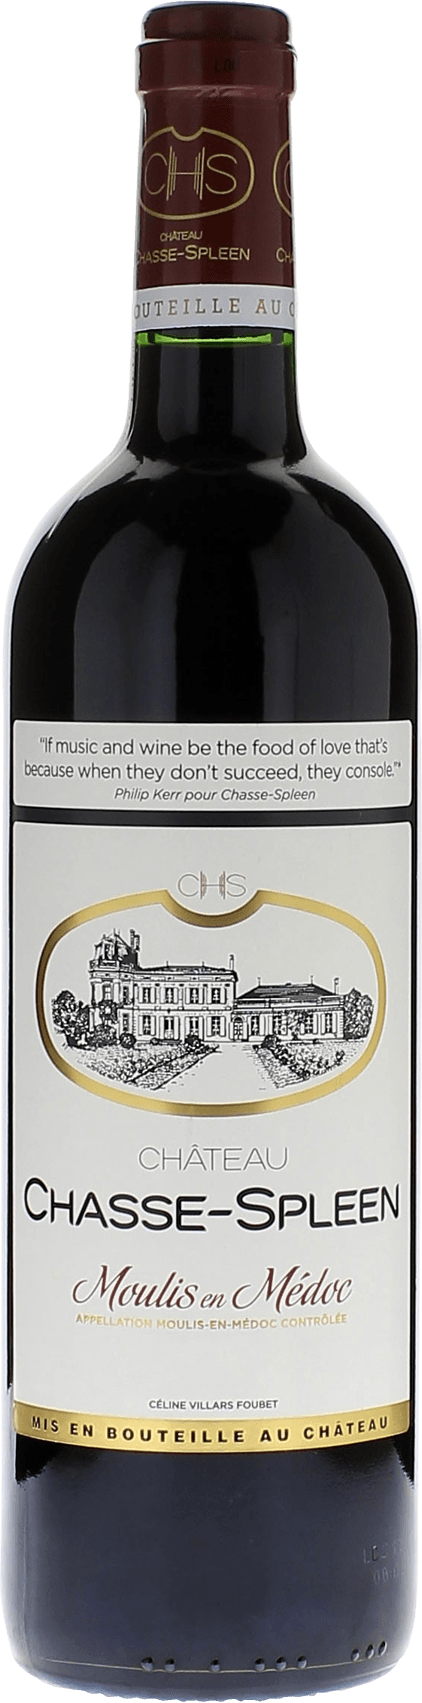 Chasse spleen 2014 Cru Bourgeois Exceptionnel Moulis, Bordeaux rouge